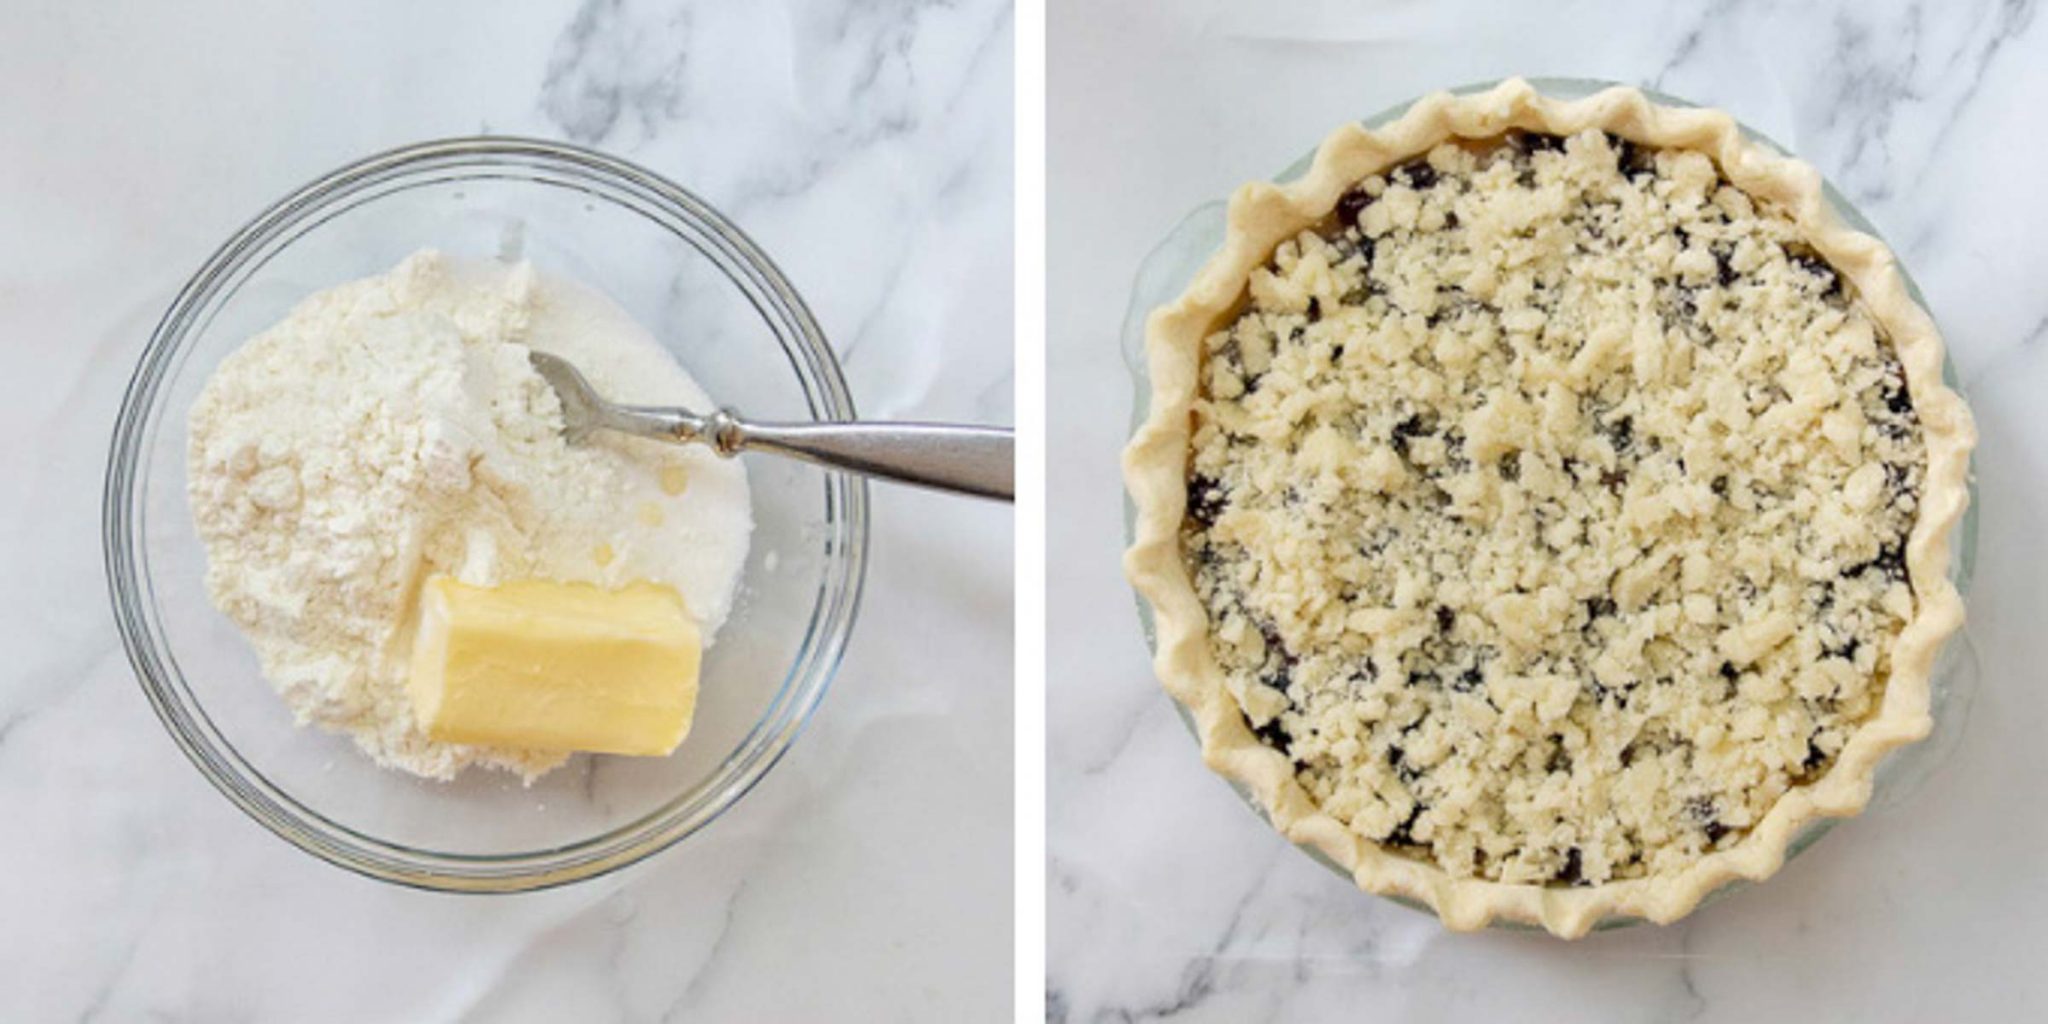 images showing how to make streusel topping